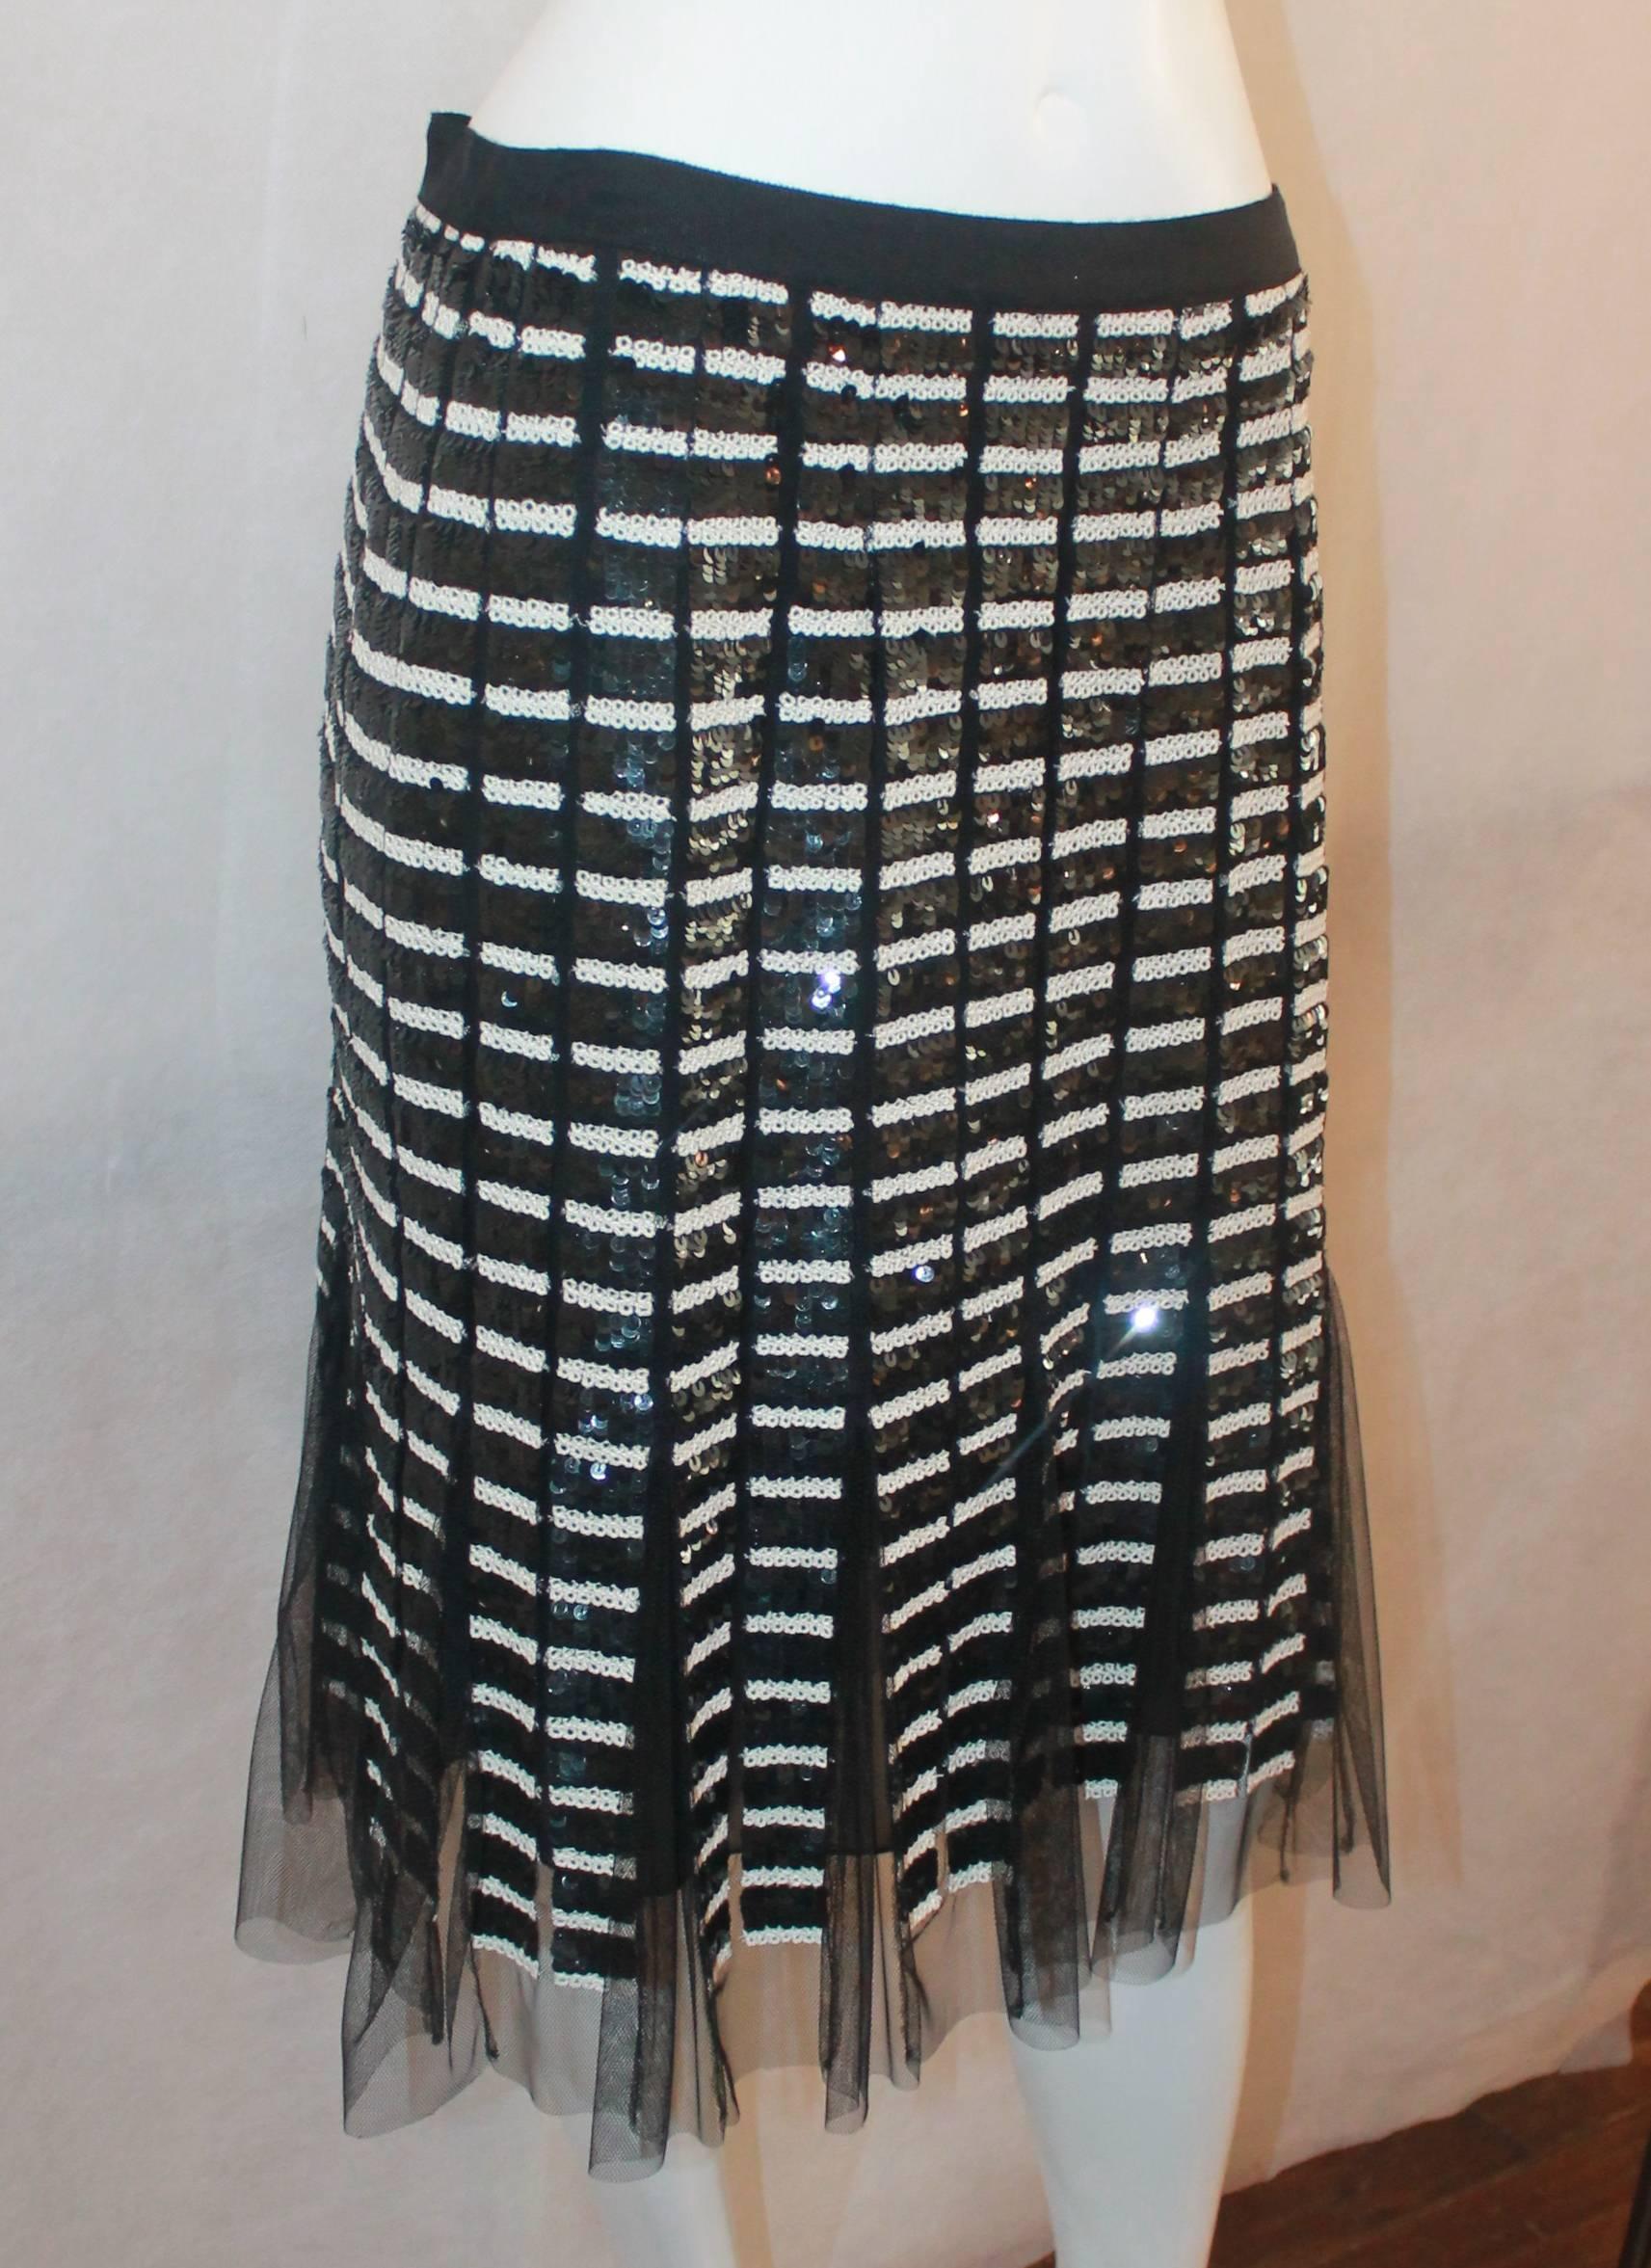 Oscar de la Renta Black & Ivory Sequin and Mesh Pleated Skirt - 10. This skirt is in excellent condition and is covered in sequins that are in a striped pattern. The bottom of the piece is pleated and the mesh sticks out. The waist also has a